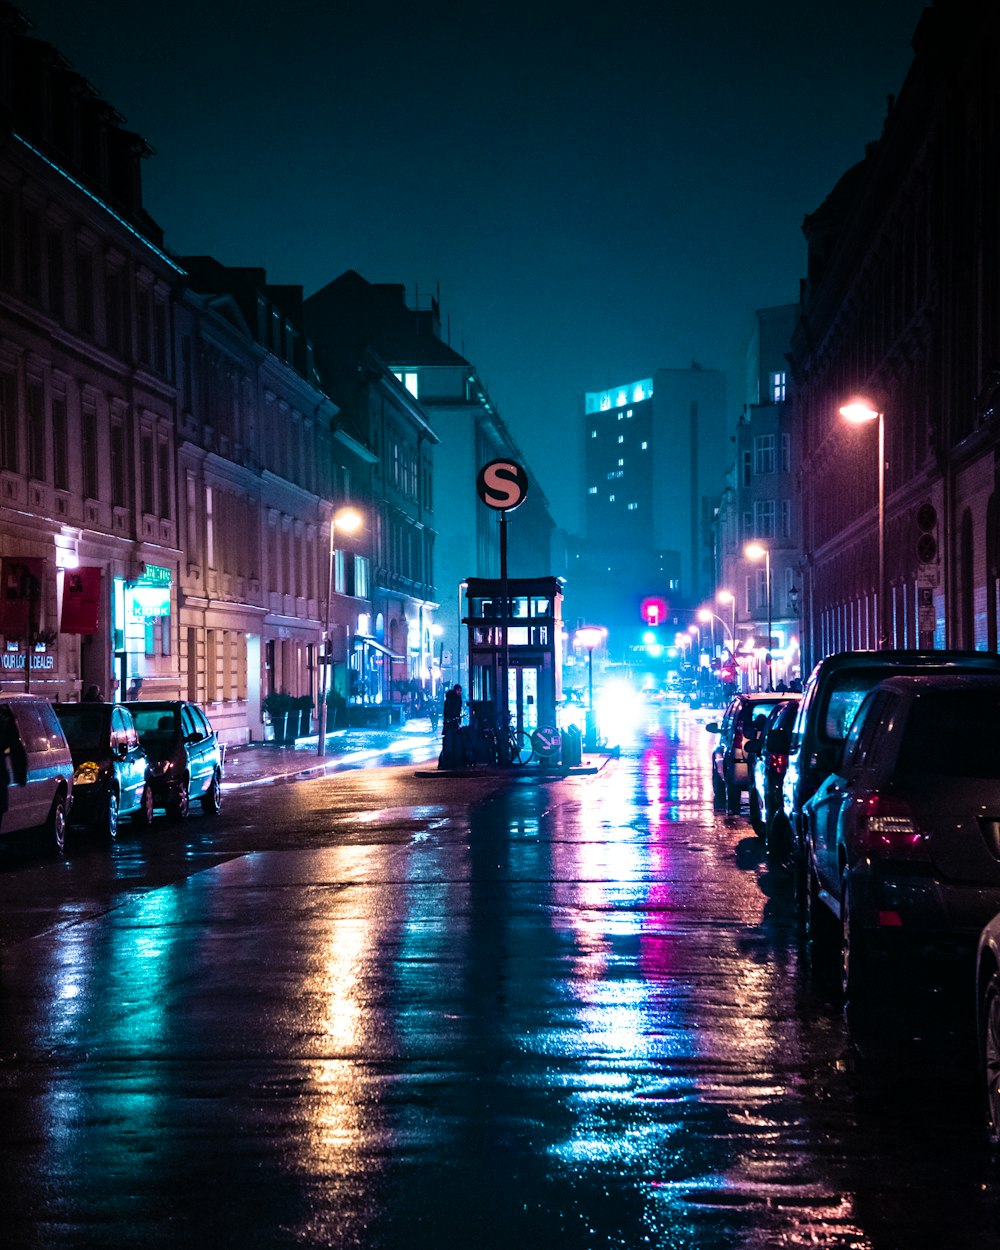 cars parked on side of the road during night time